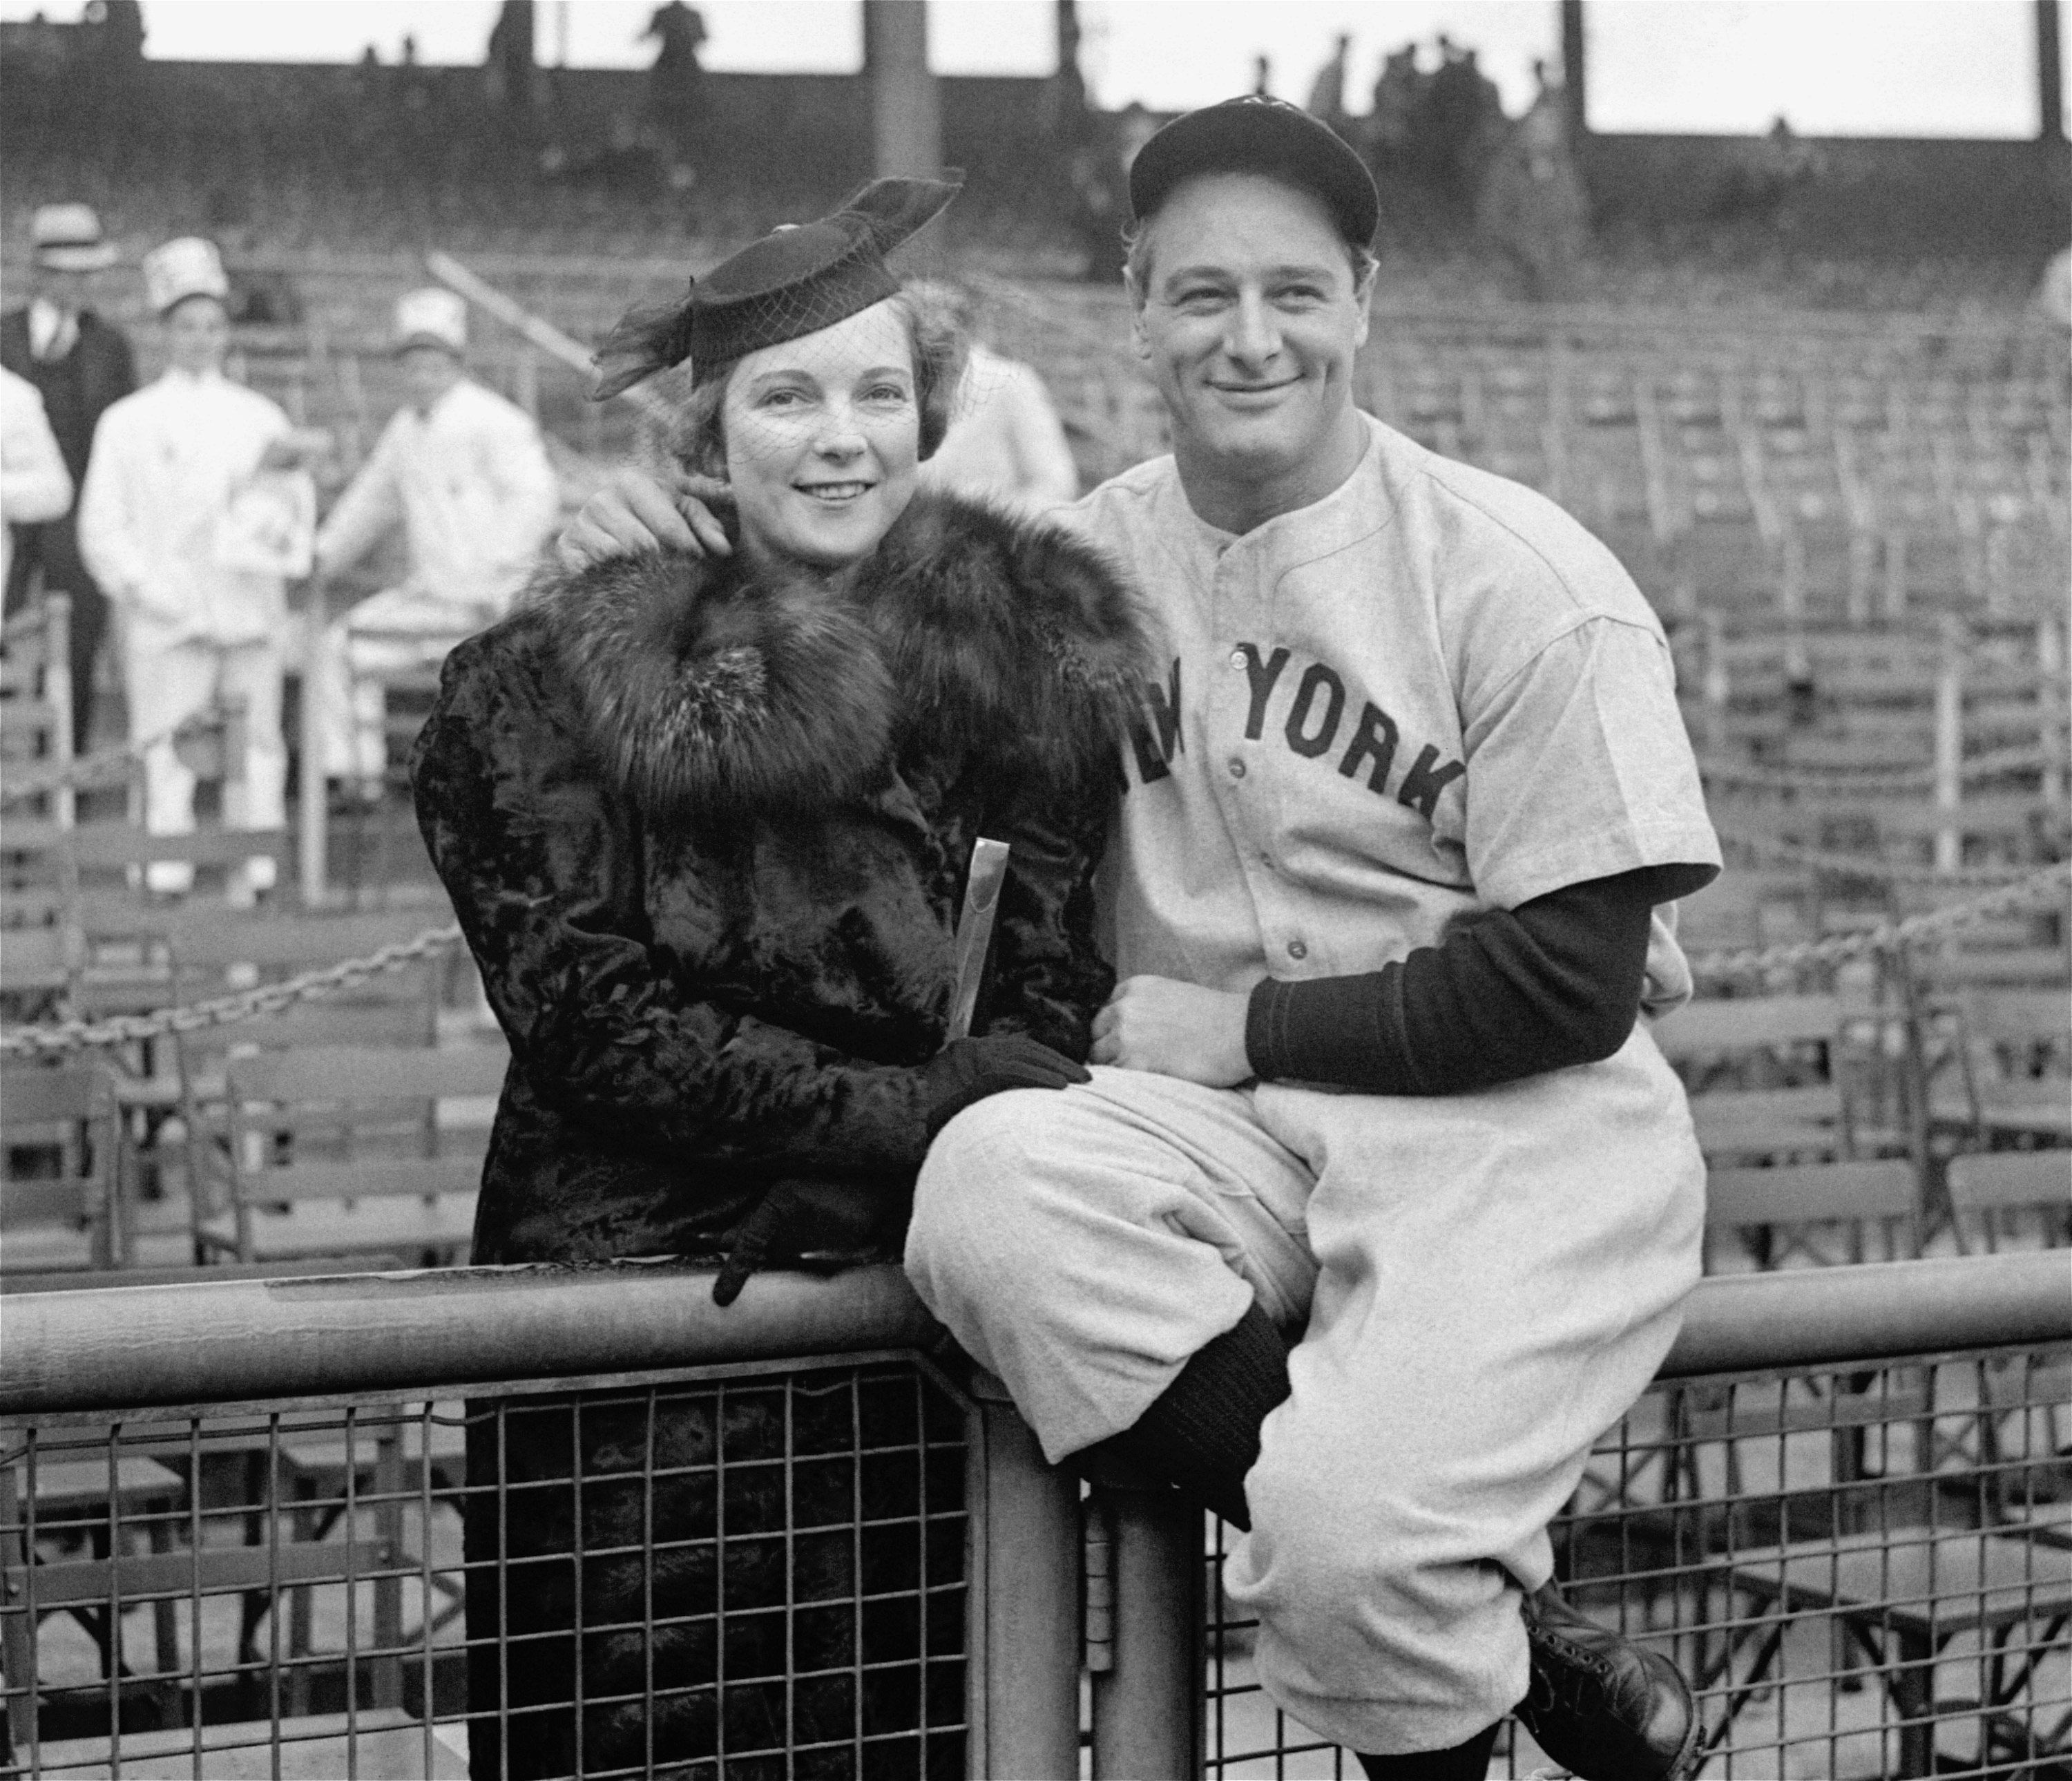 Lou Gehrig speech: What did he say and why is Lou Gehrig disease